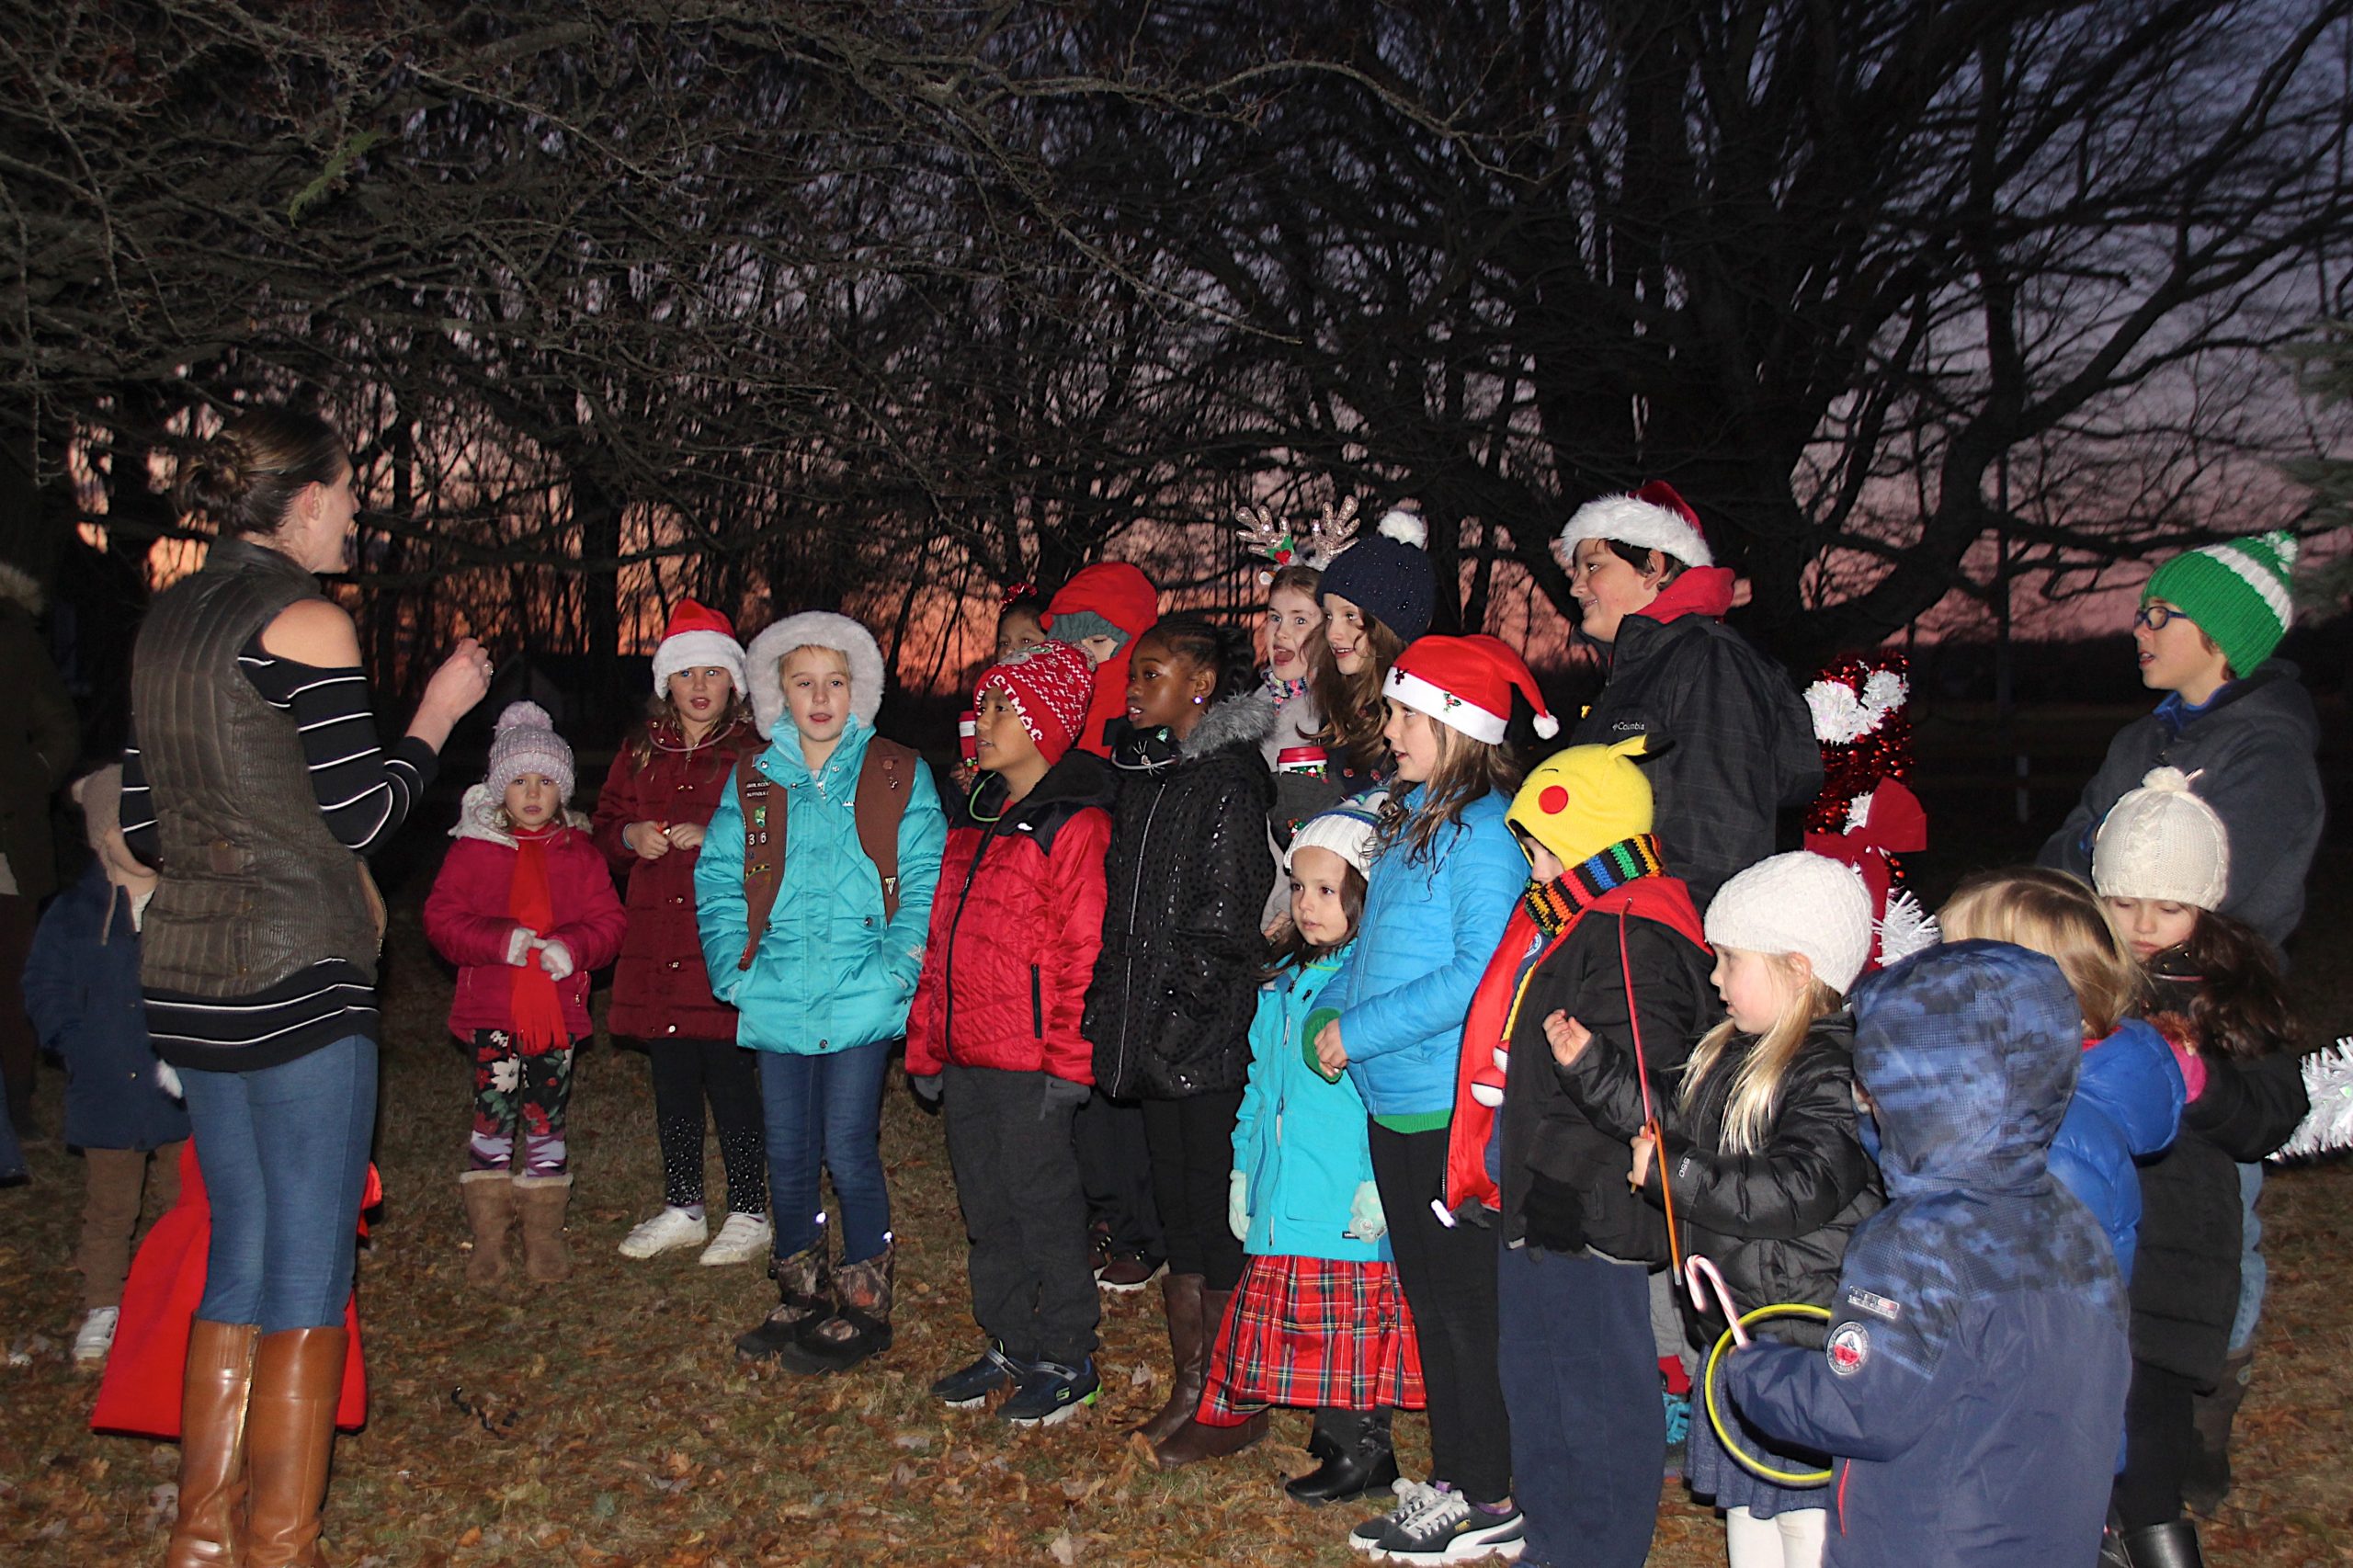 There were carols and cheer at the tree lighting party at the Amagansett Fire Department on Saturday. KYRIL BROMLEY